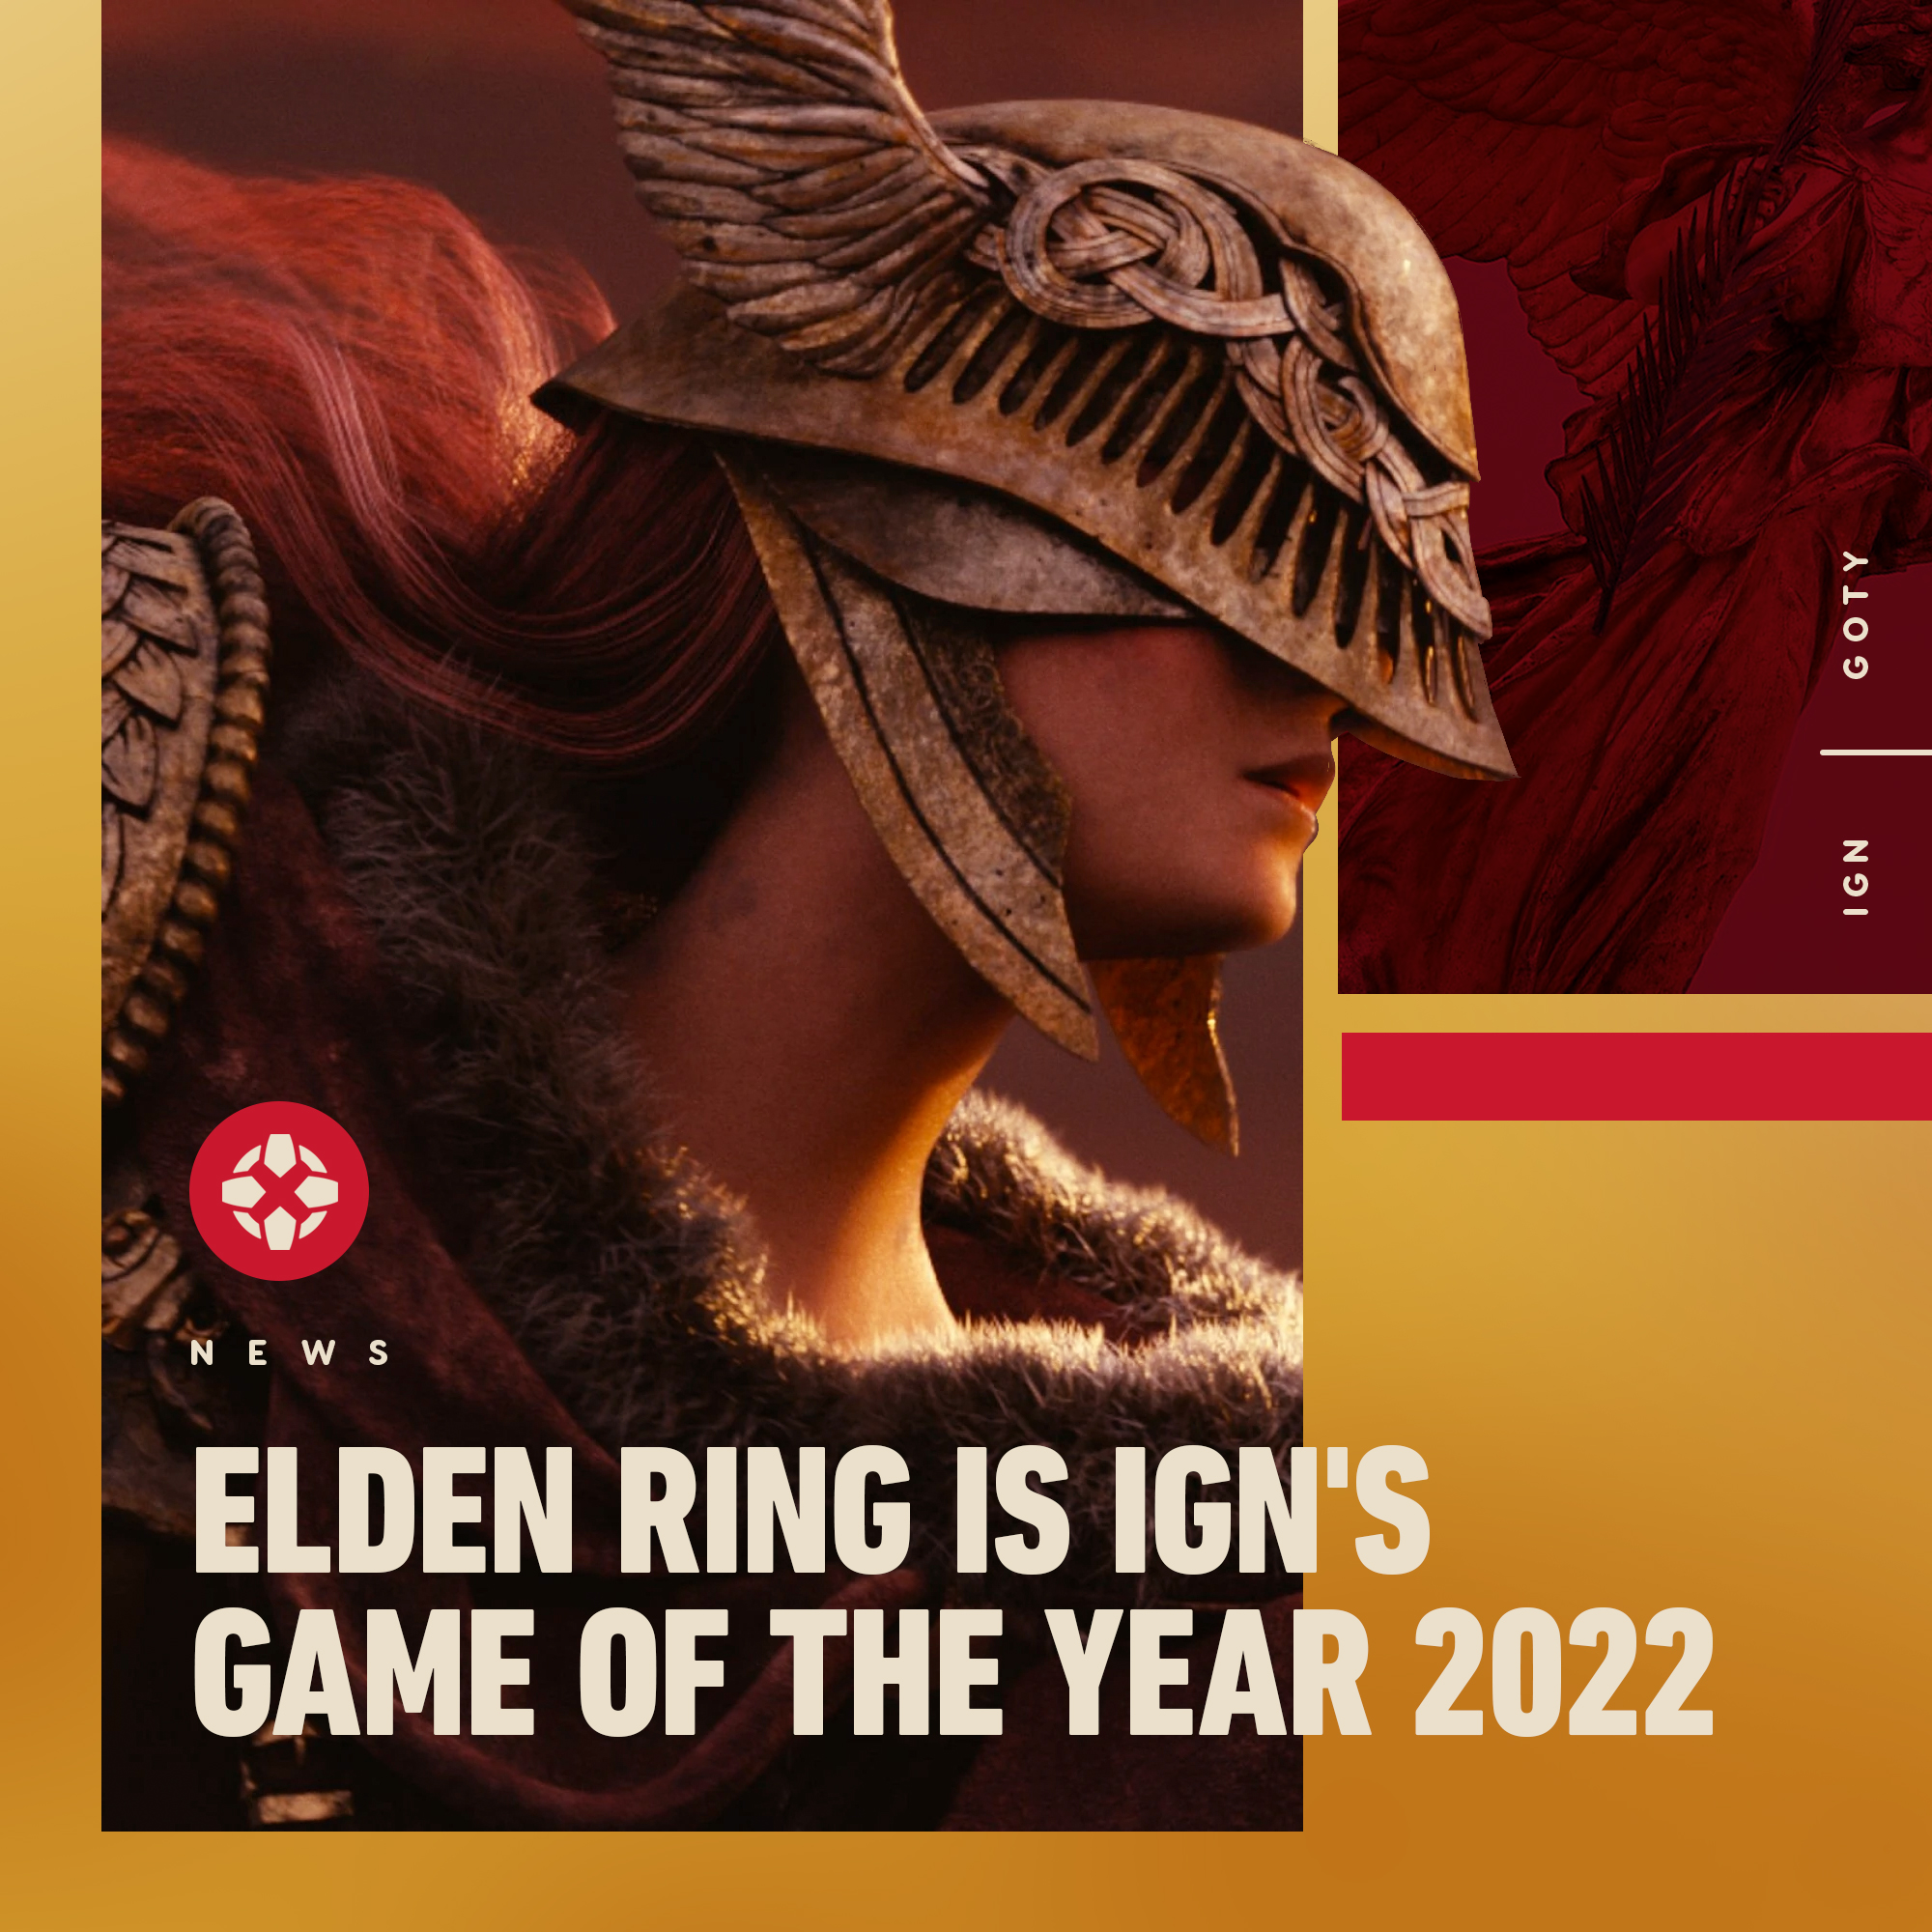 Our GOTY of 2022